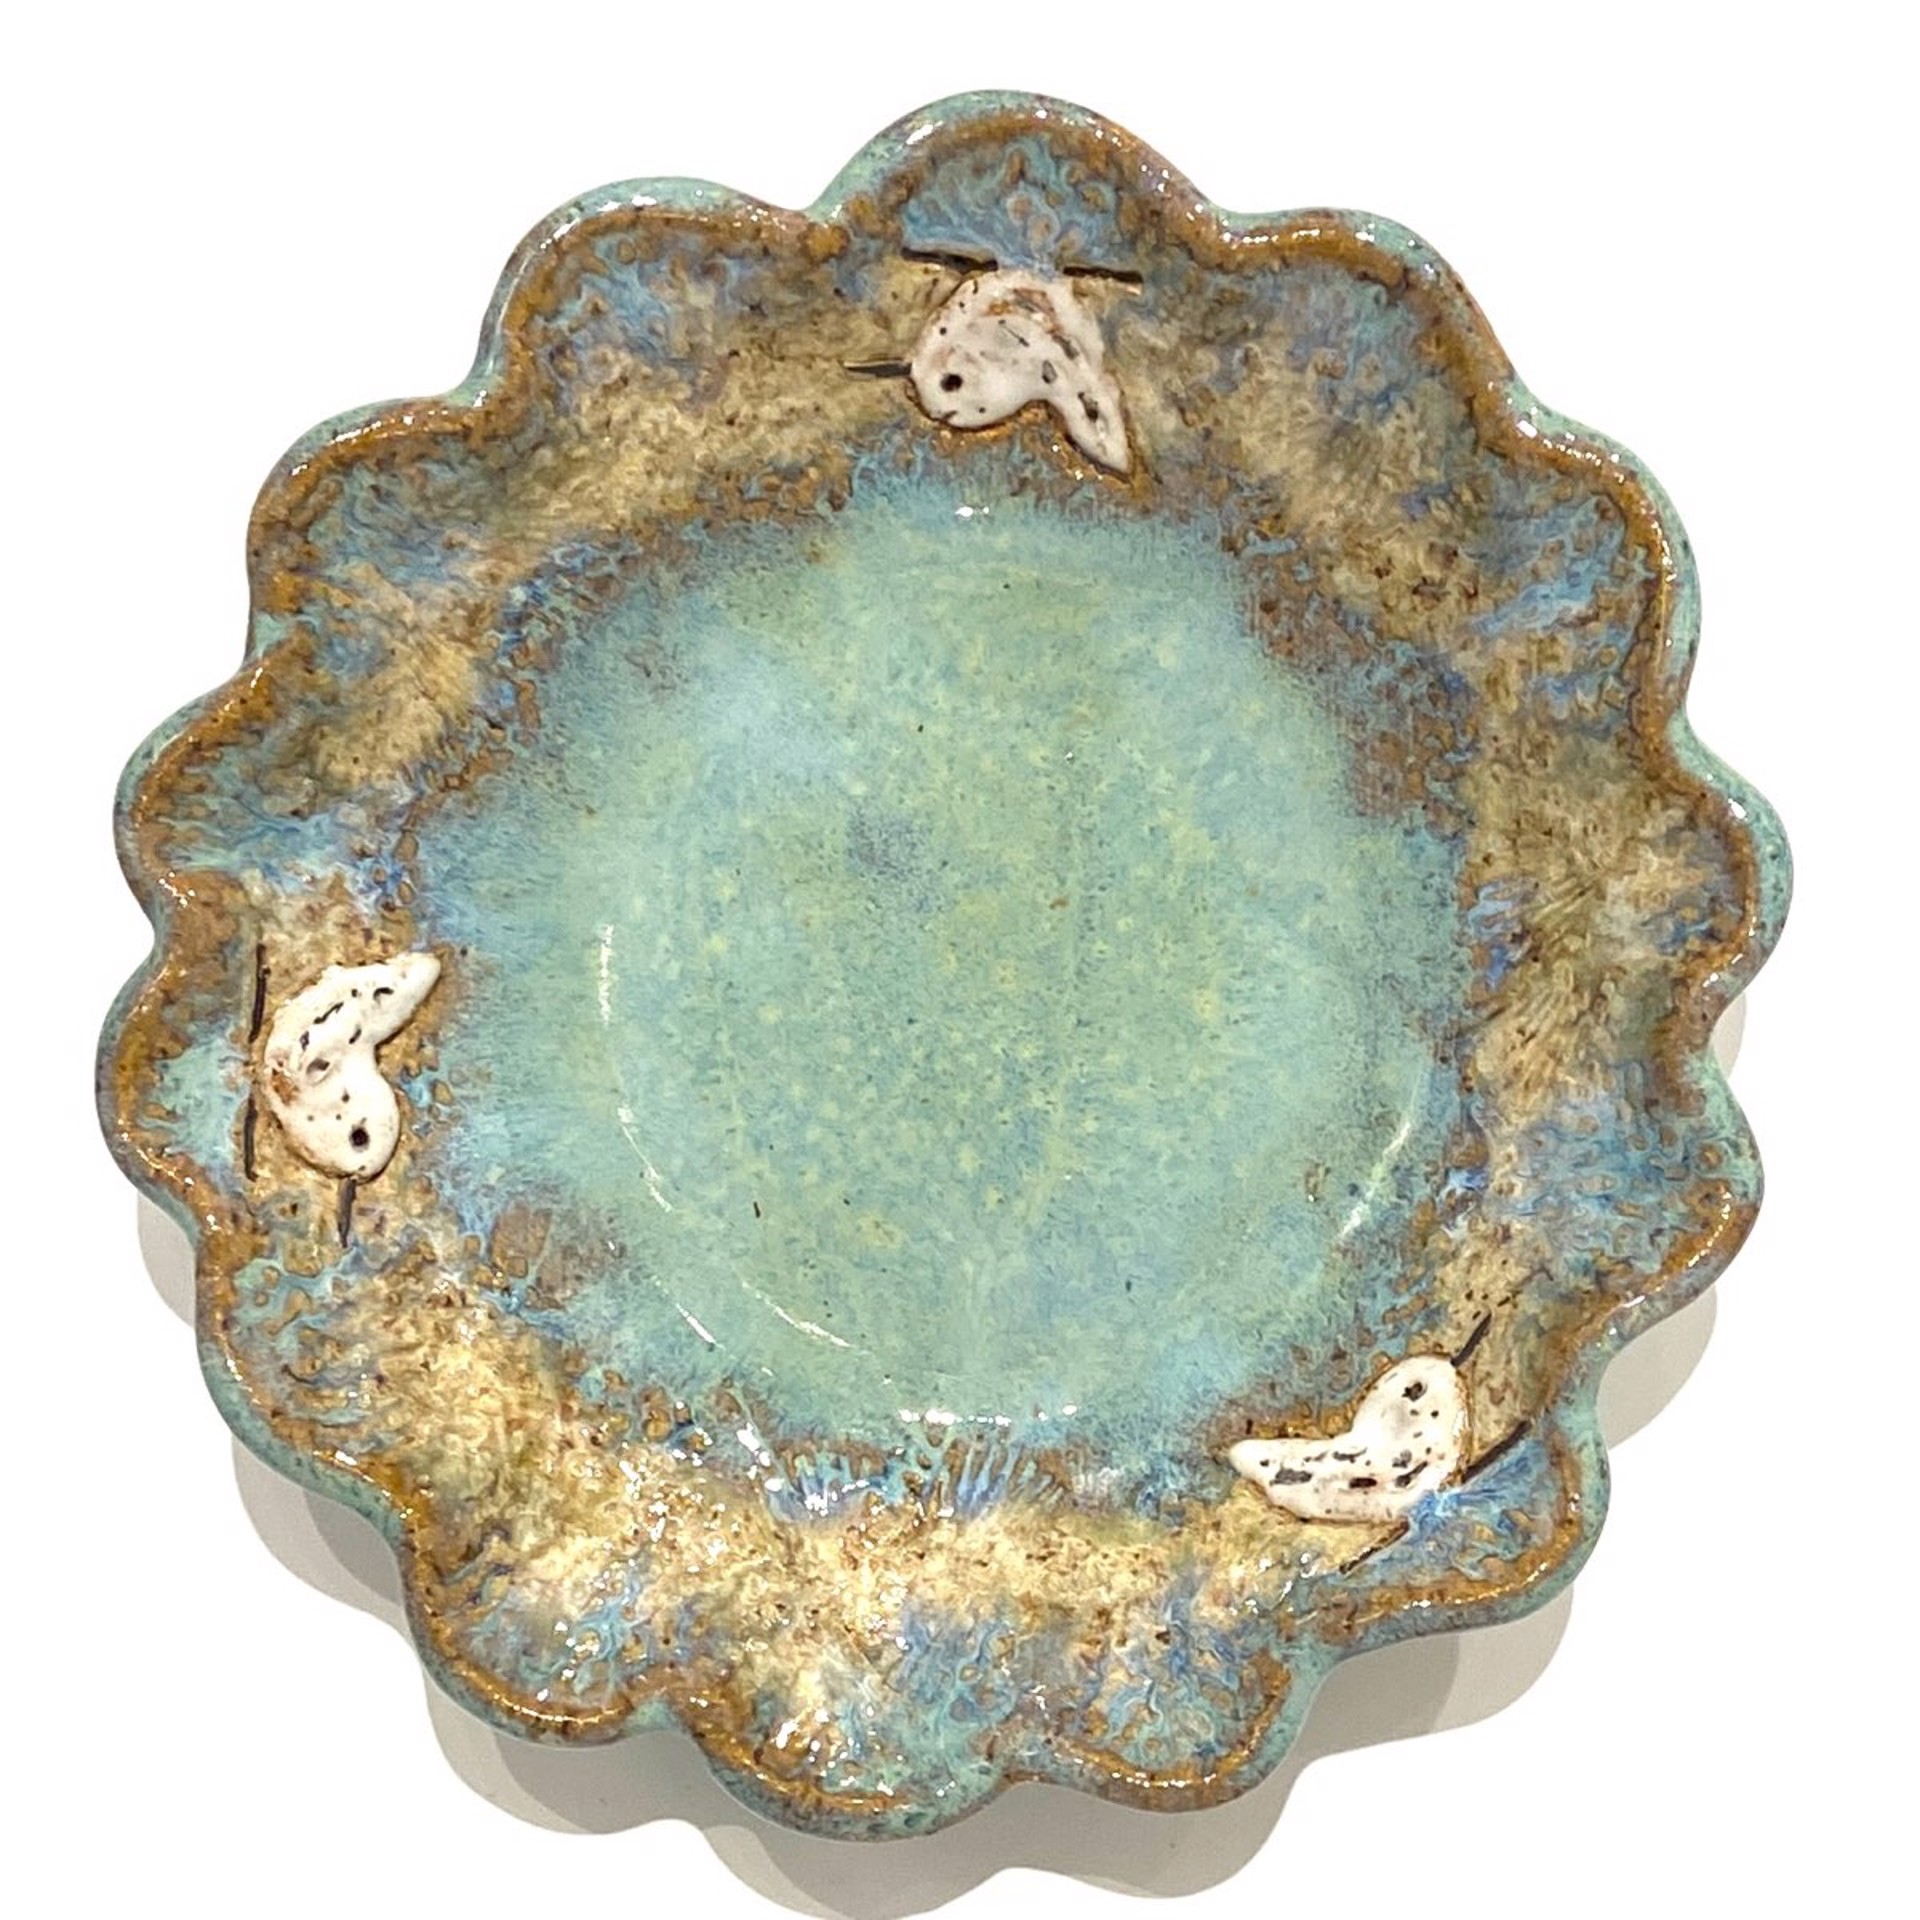 LG23-975 Small Round Scalloped Bowl with Three Sandpipers (Green Glaze) by Jim & Steffi Logan